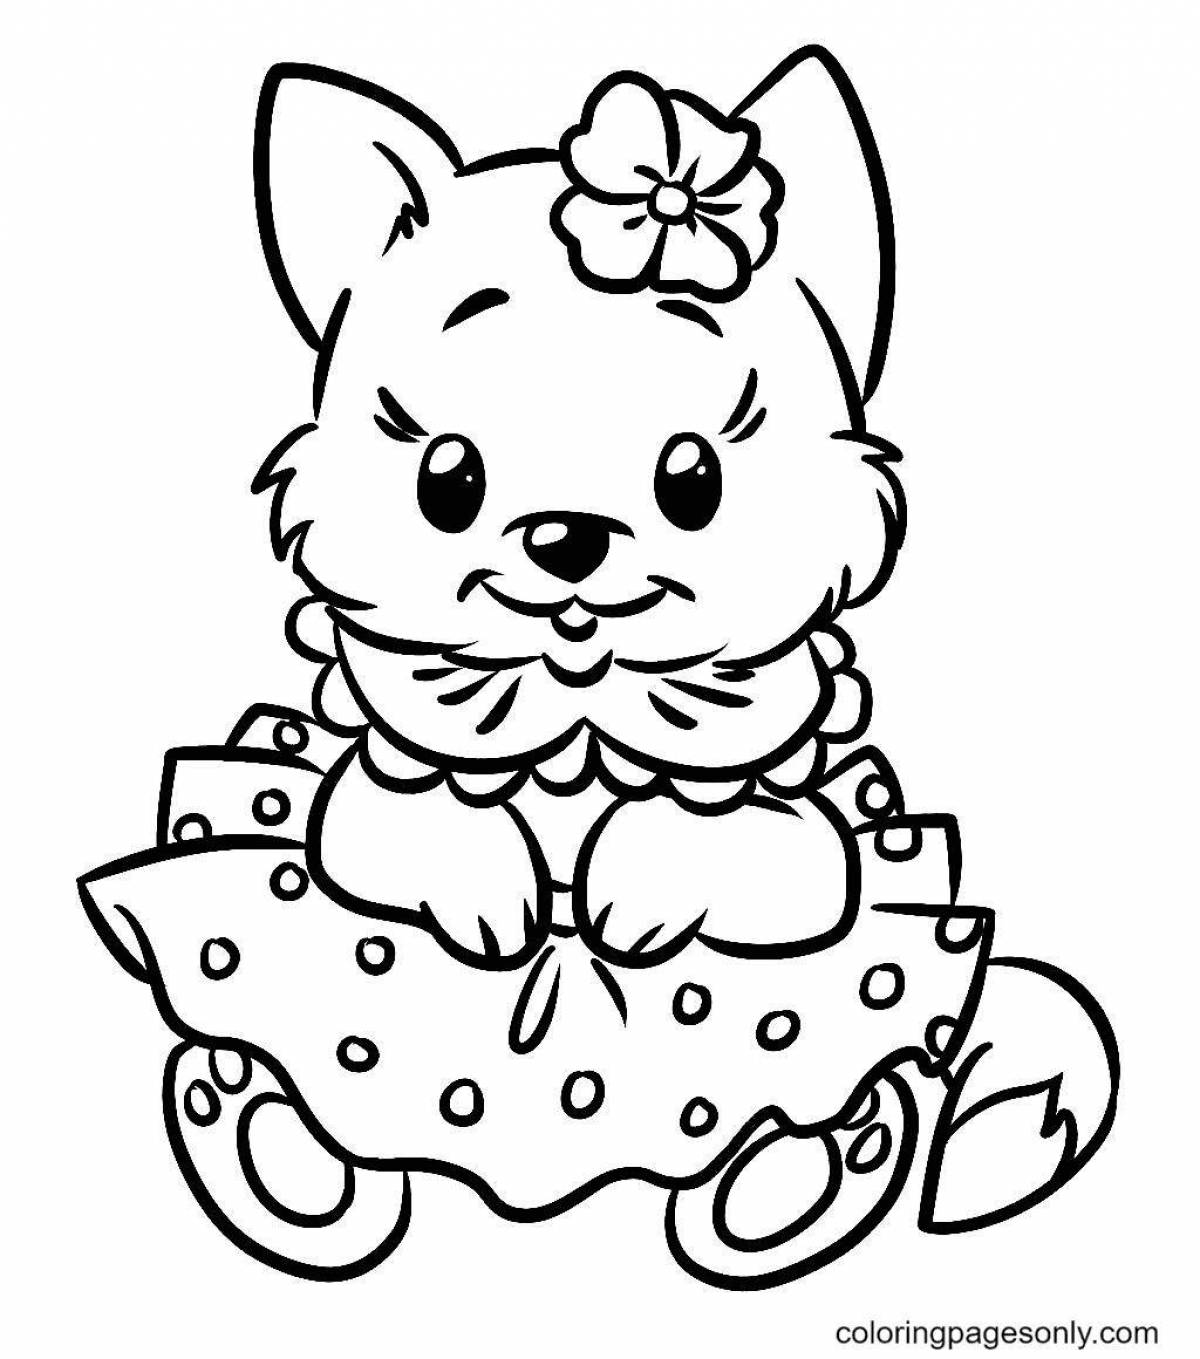 Coloring book fluffy kitten with a bow